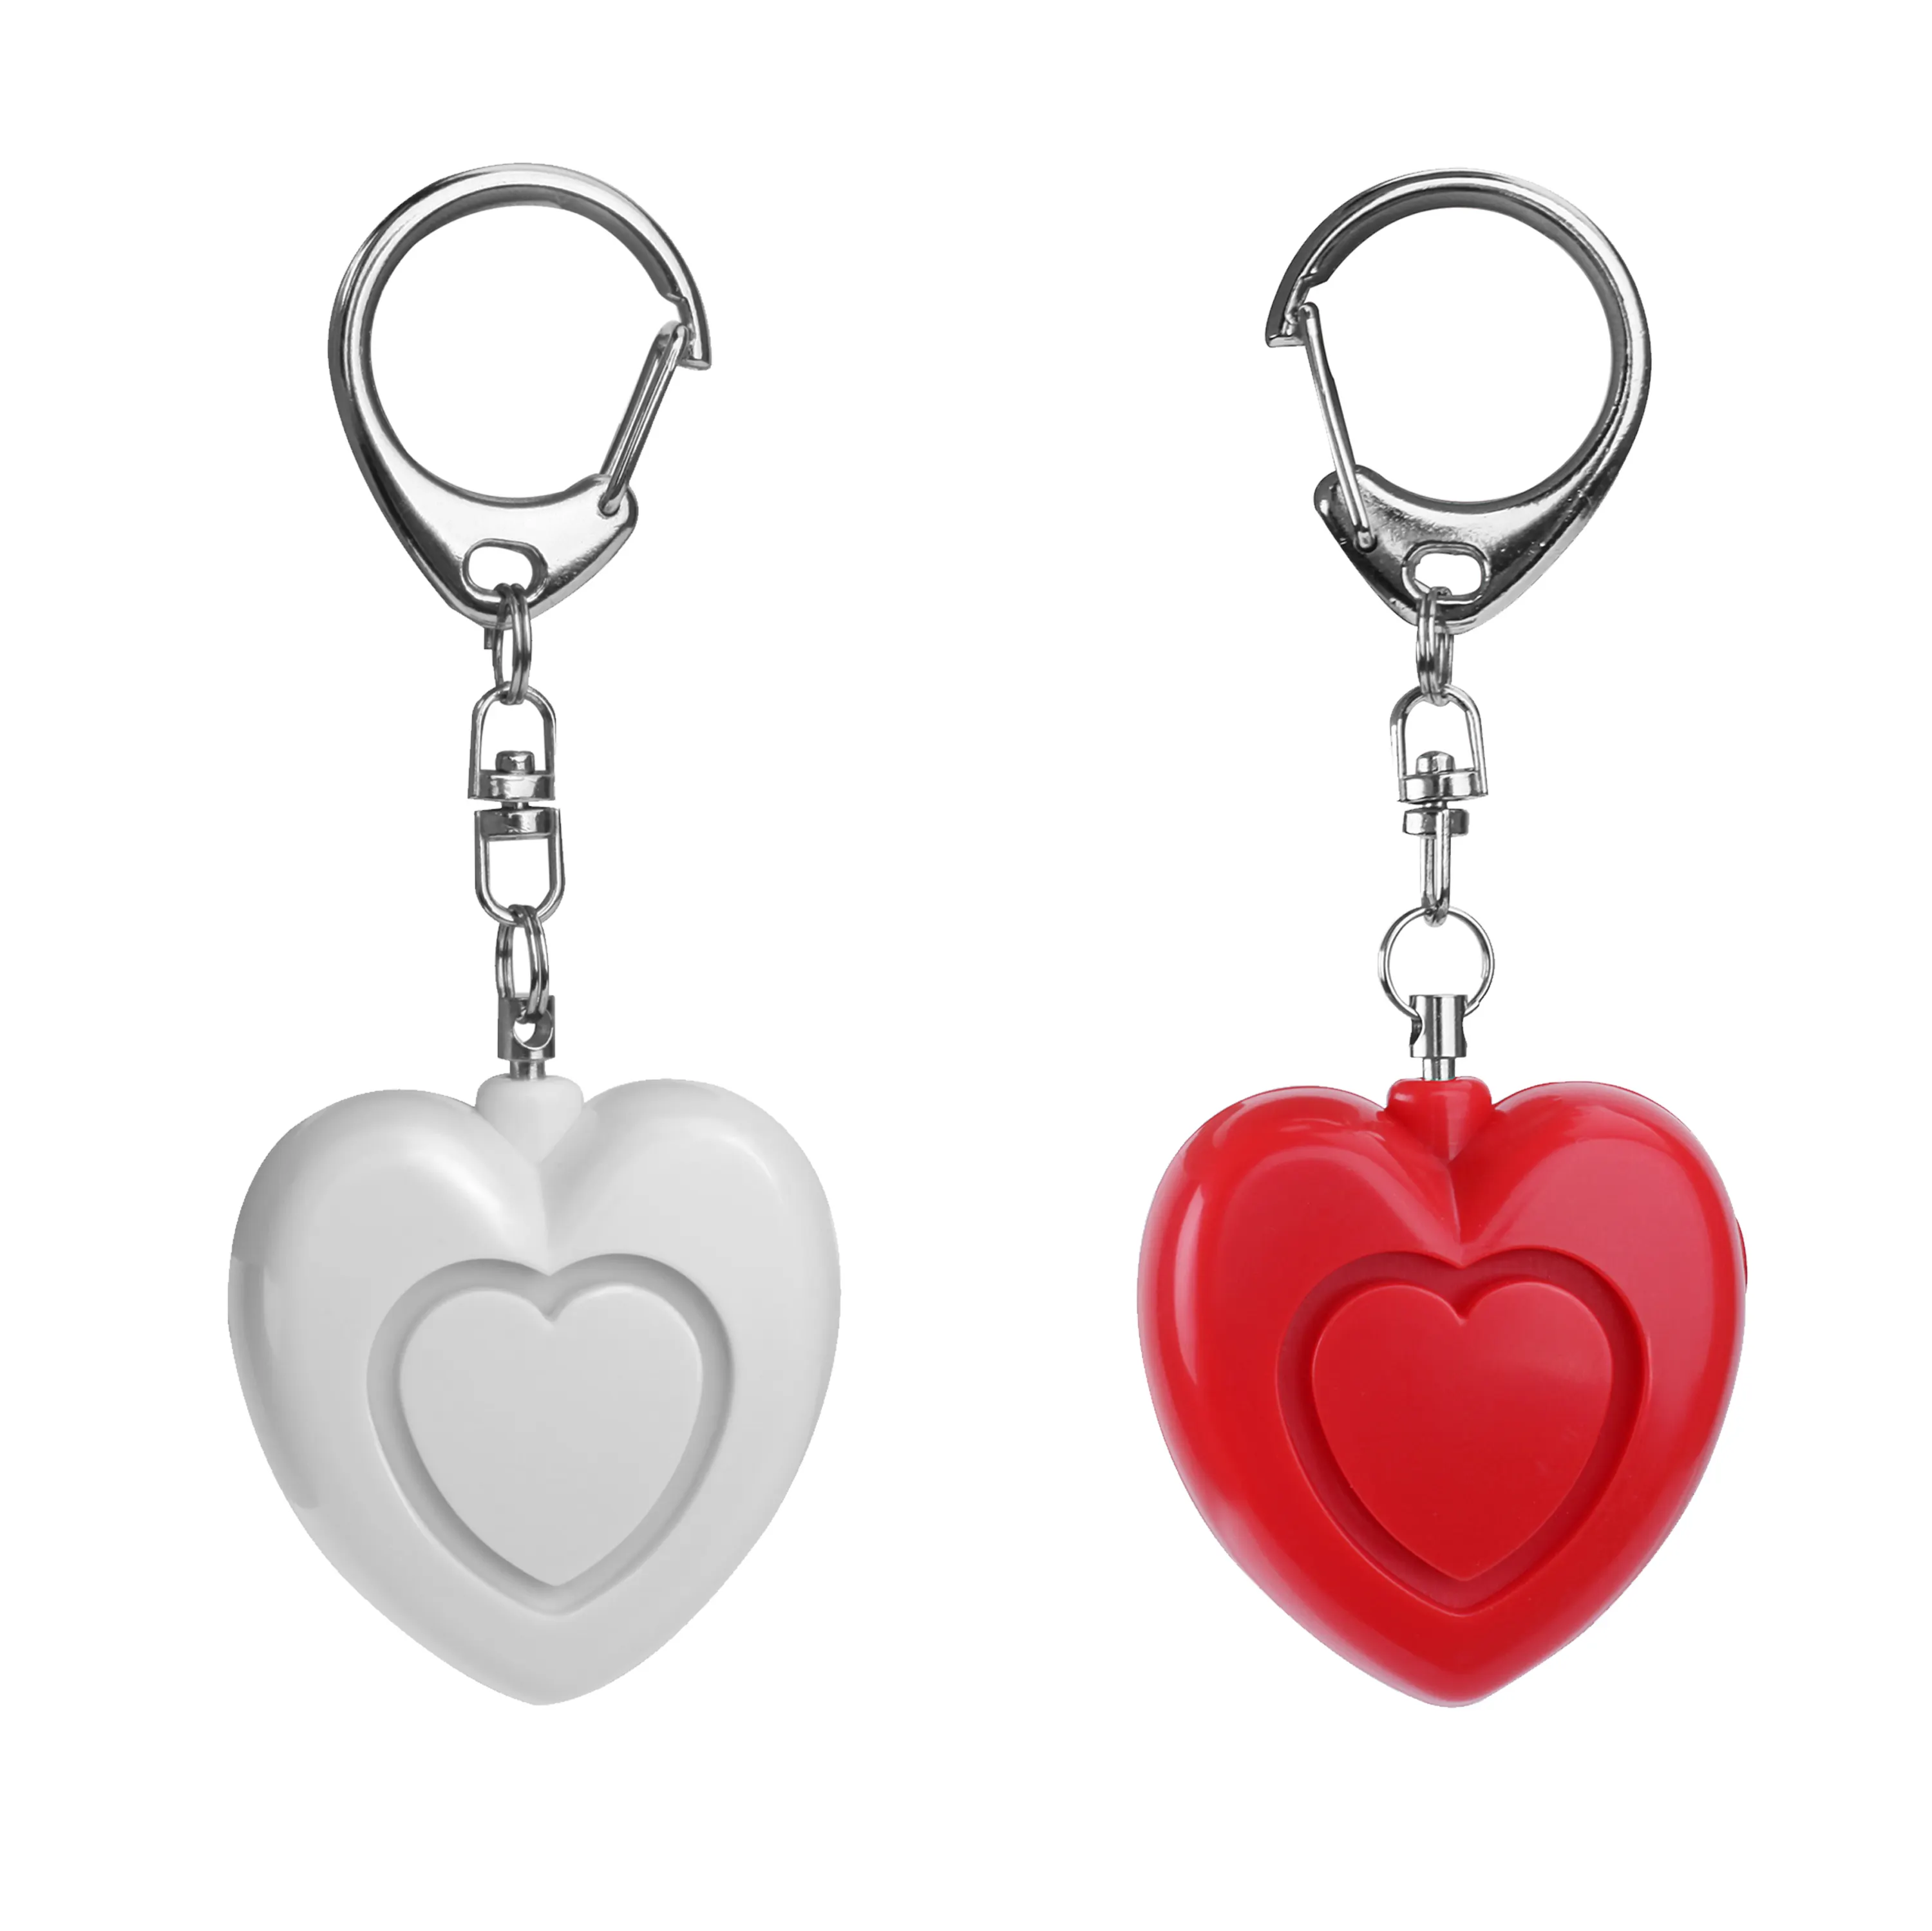 Meinoe Hot Sell Personal Alarm Patented Heart Shape Lady Lovely Alarm With Keychain And LED Light